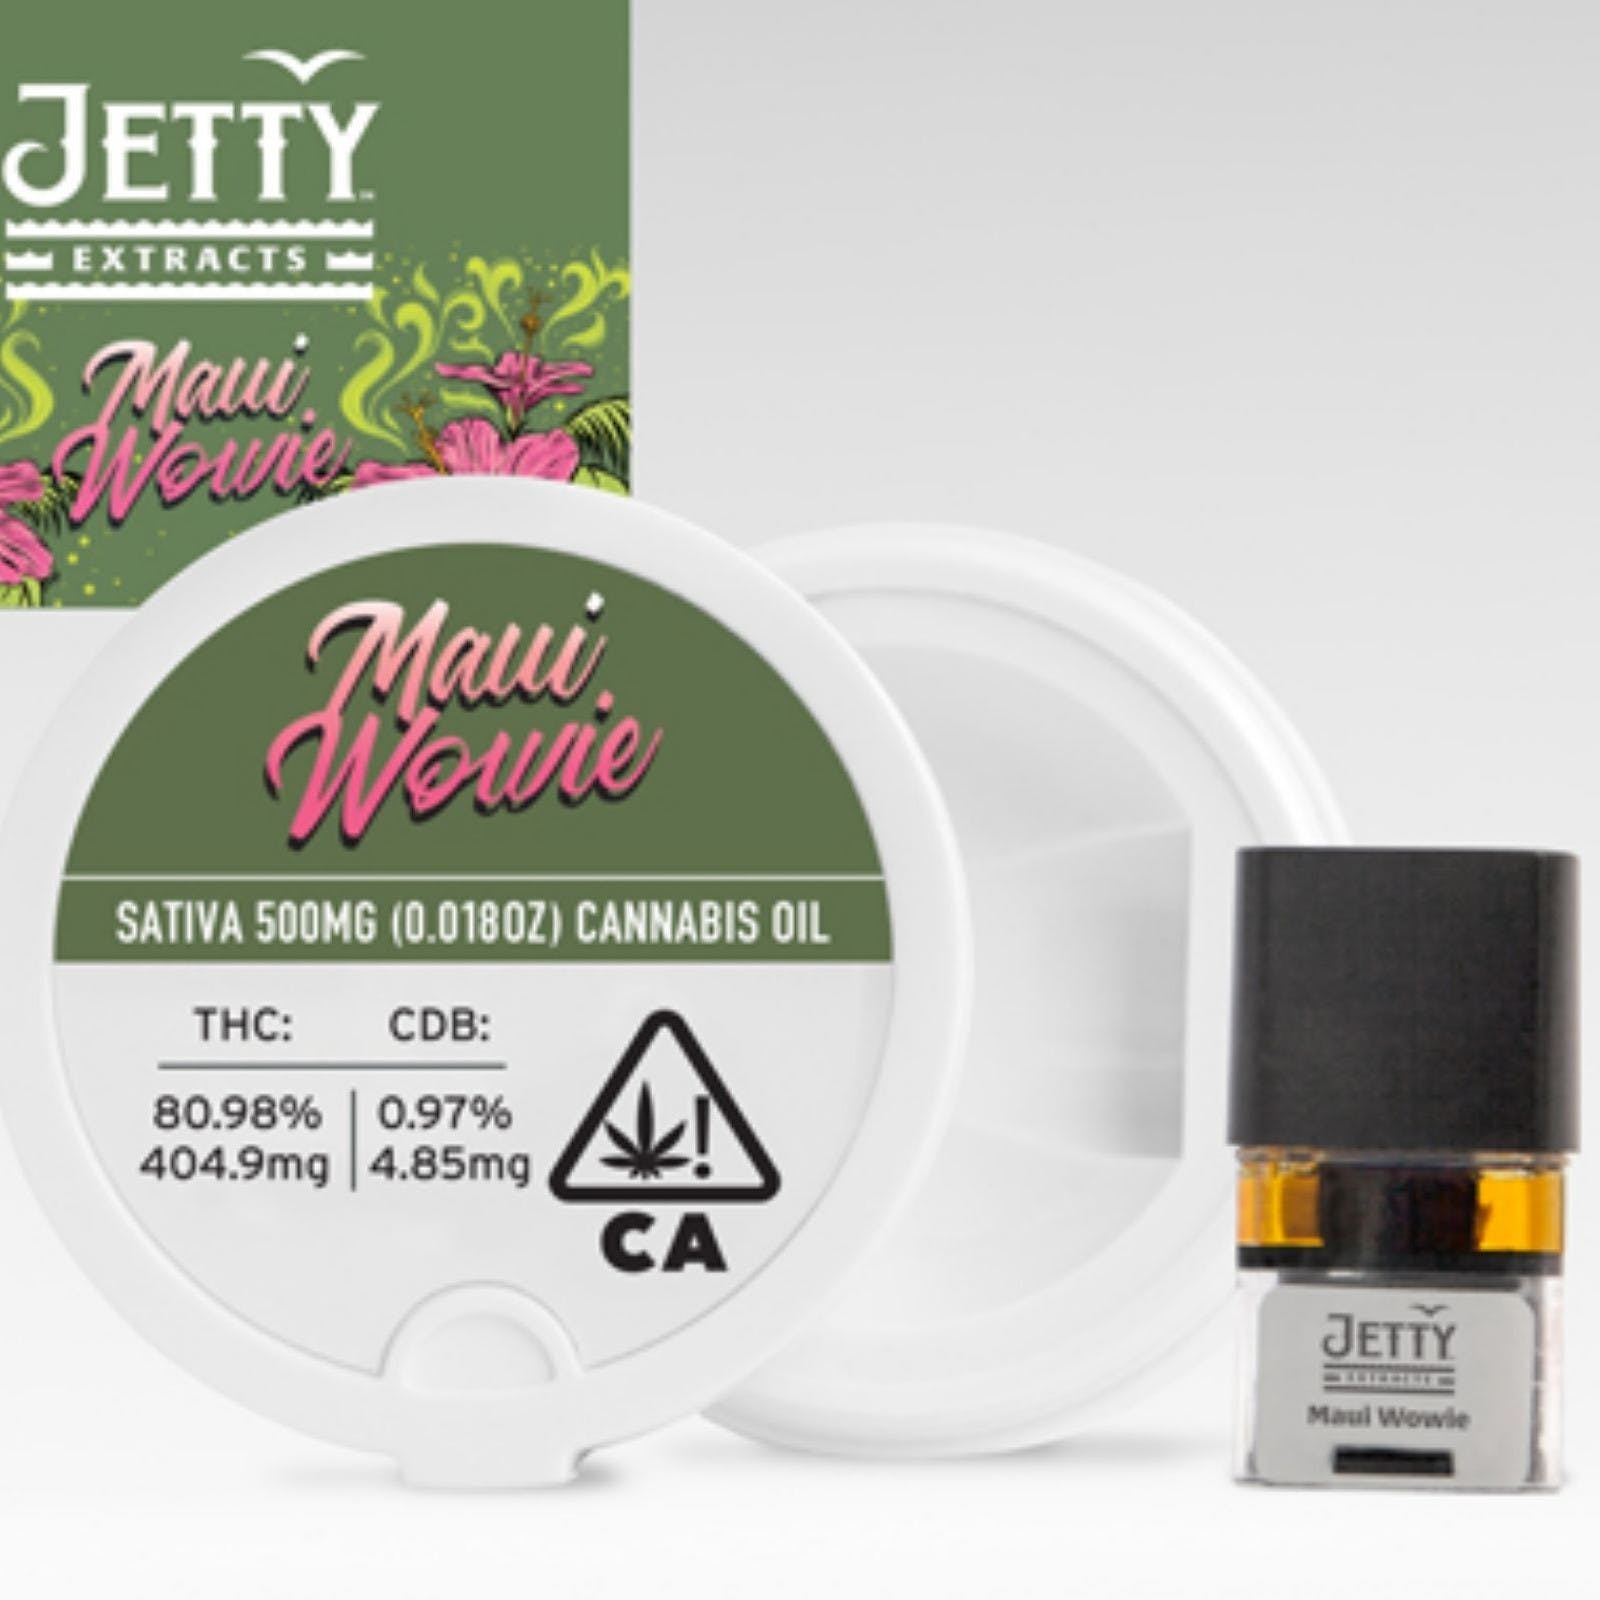 Jetty Extracts / PAX Era - Maui Wowie